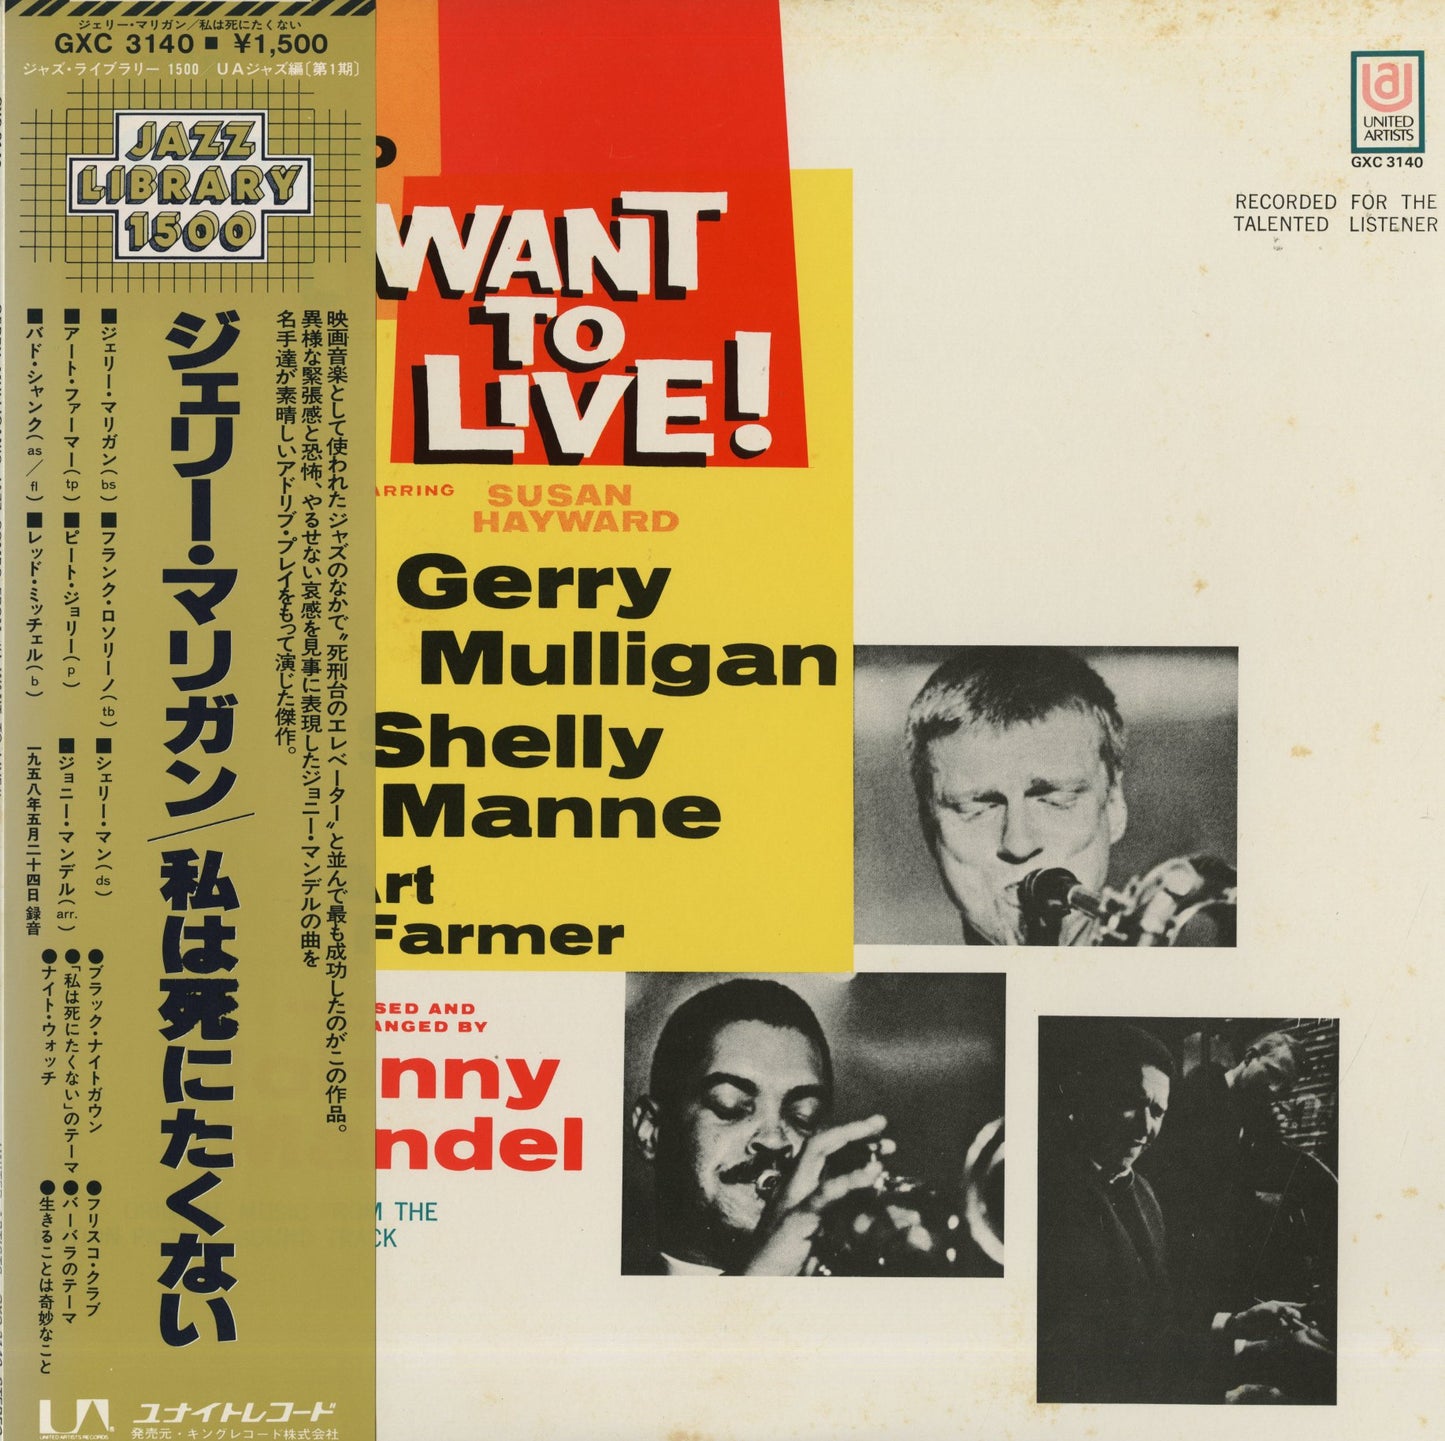 Gerry Mulligan / ジェリー・マリガン / The Jazz Combo From I Want To Live! (GXC 3140)